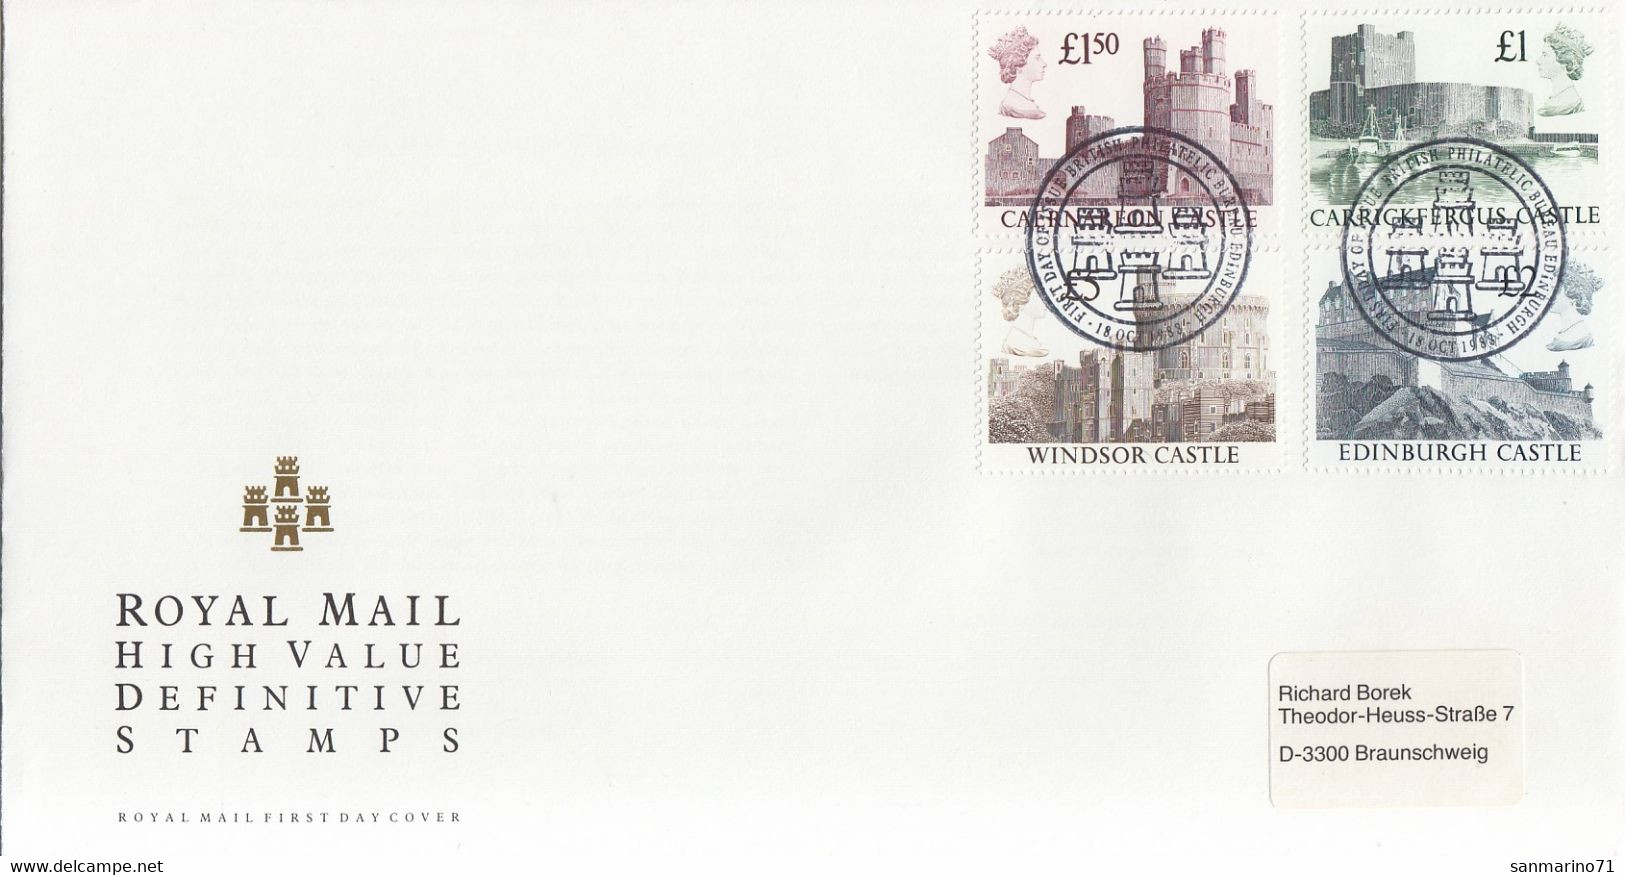 FDC GREAT BRITAIN 1174-1177 - Châteaux